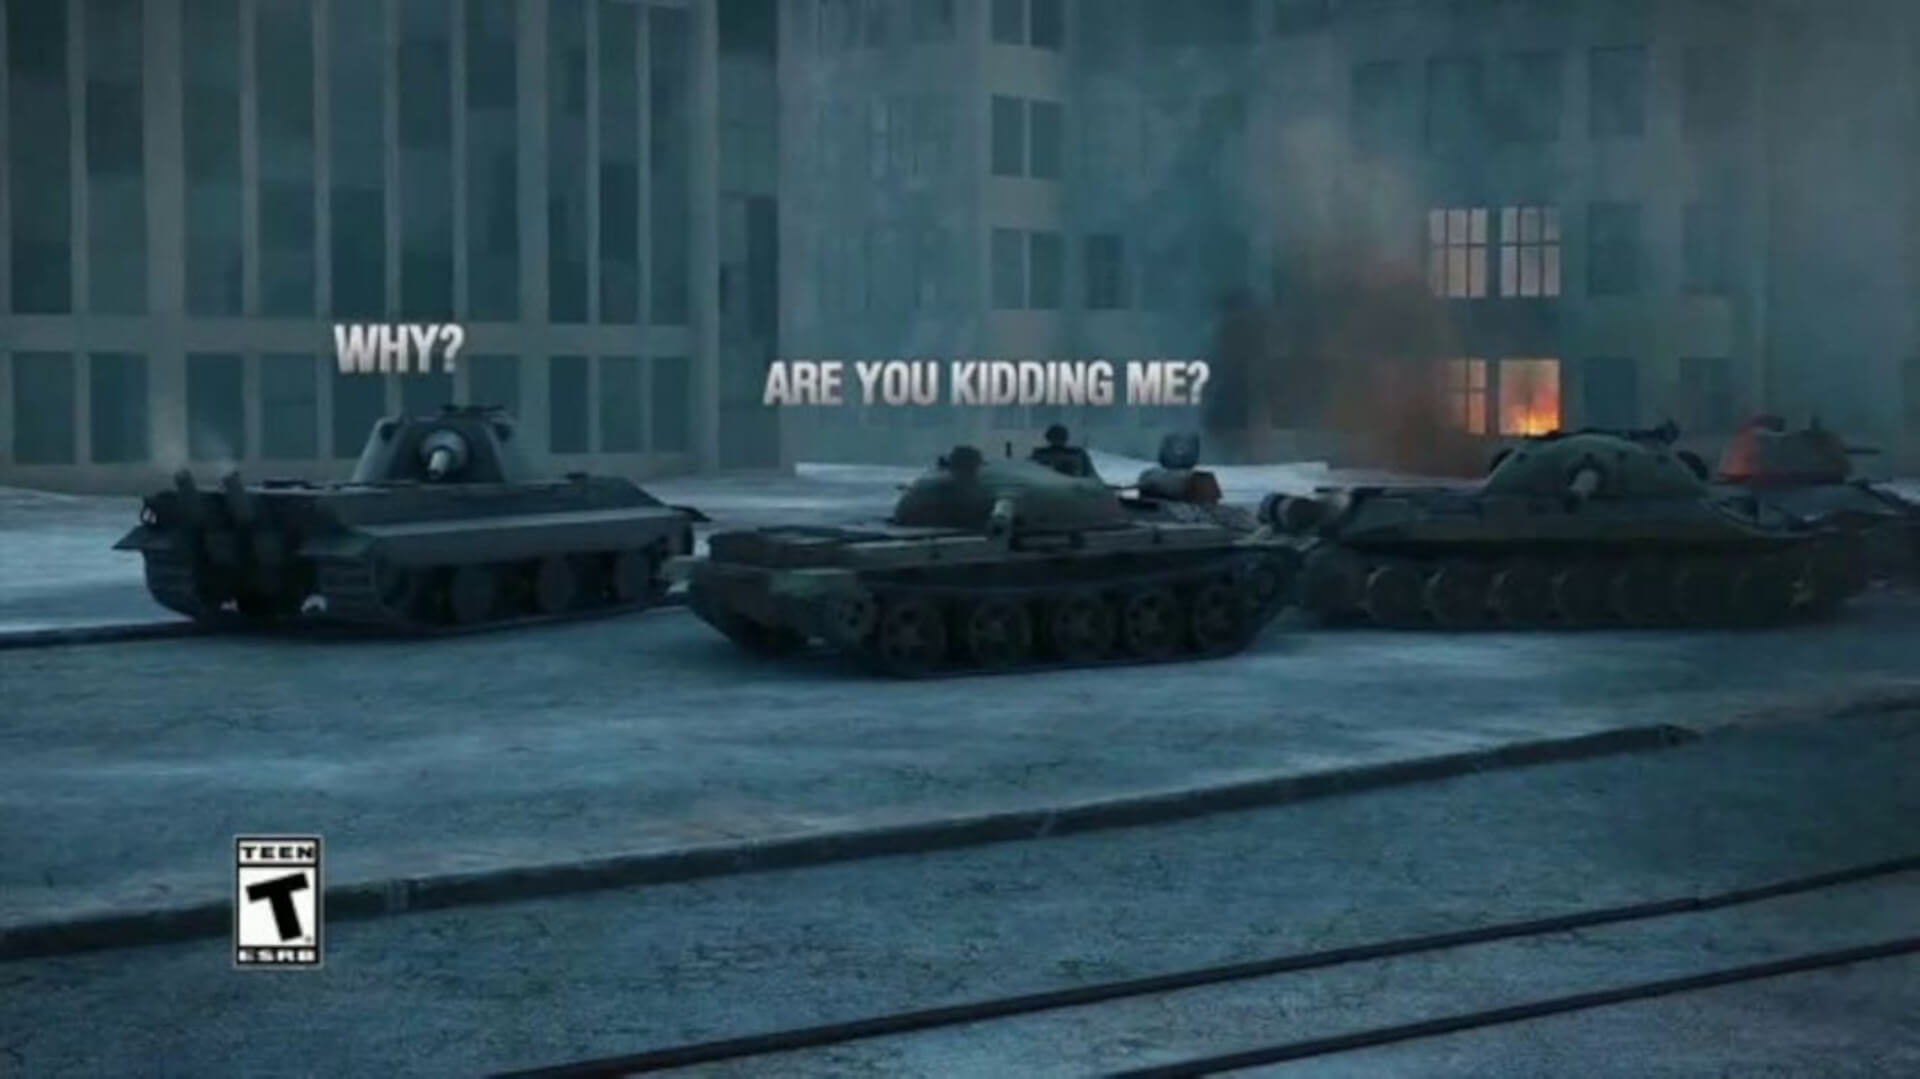 A World of Tanks ad of the type Wargaming is pausing